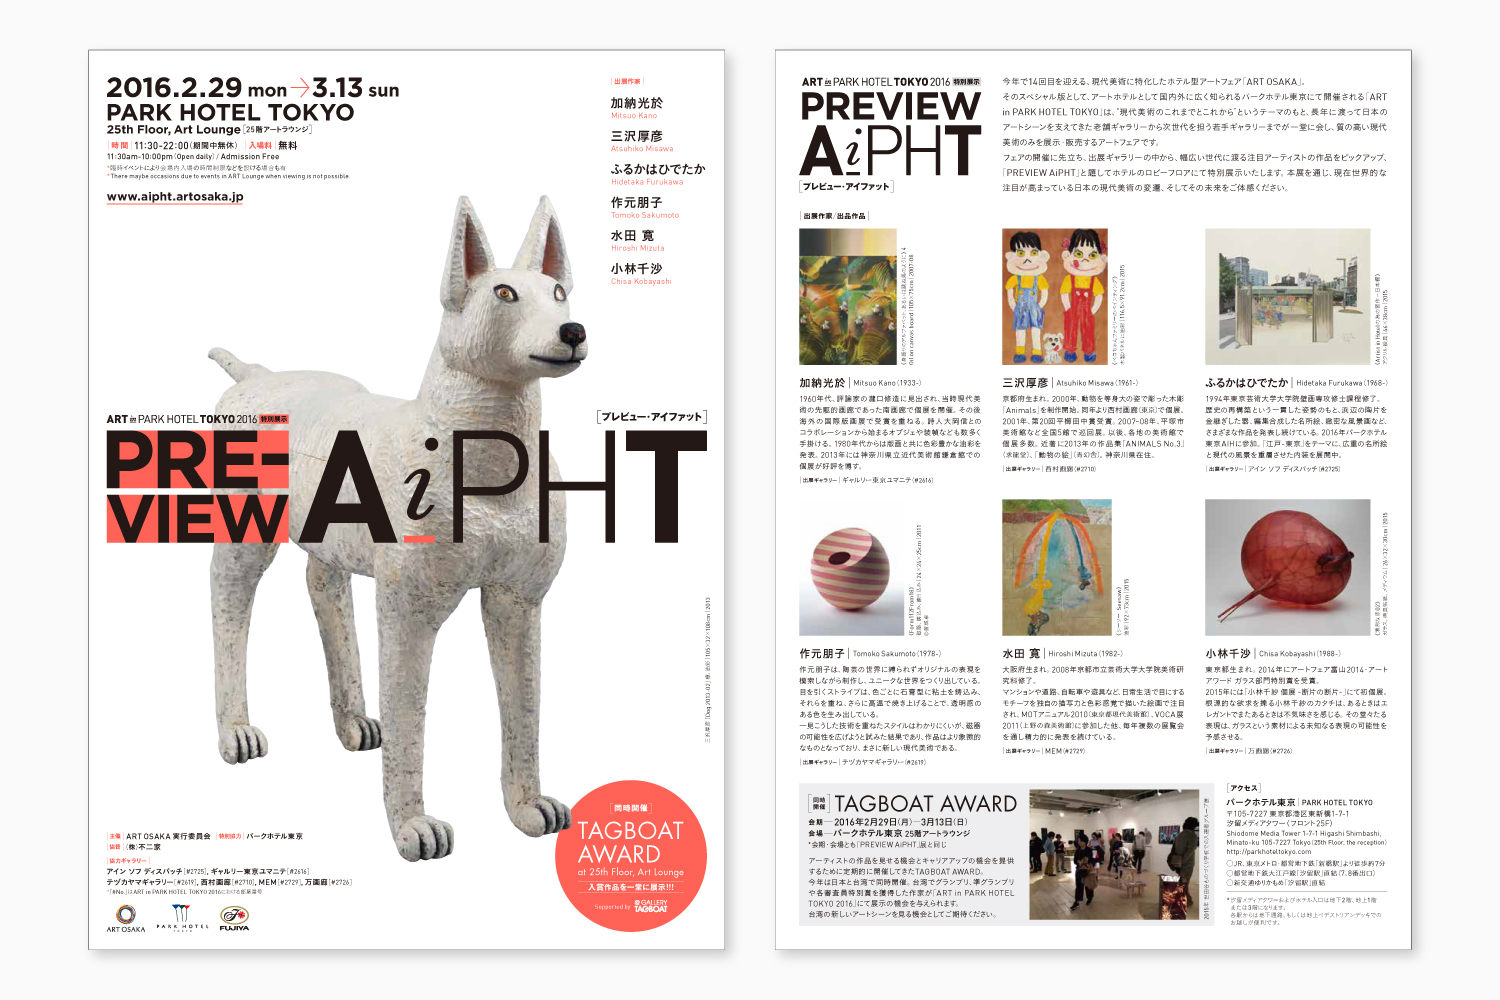 PREVIEW AiPHT 2016